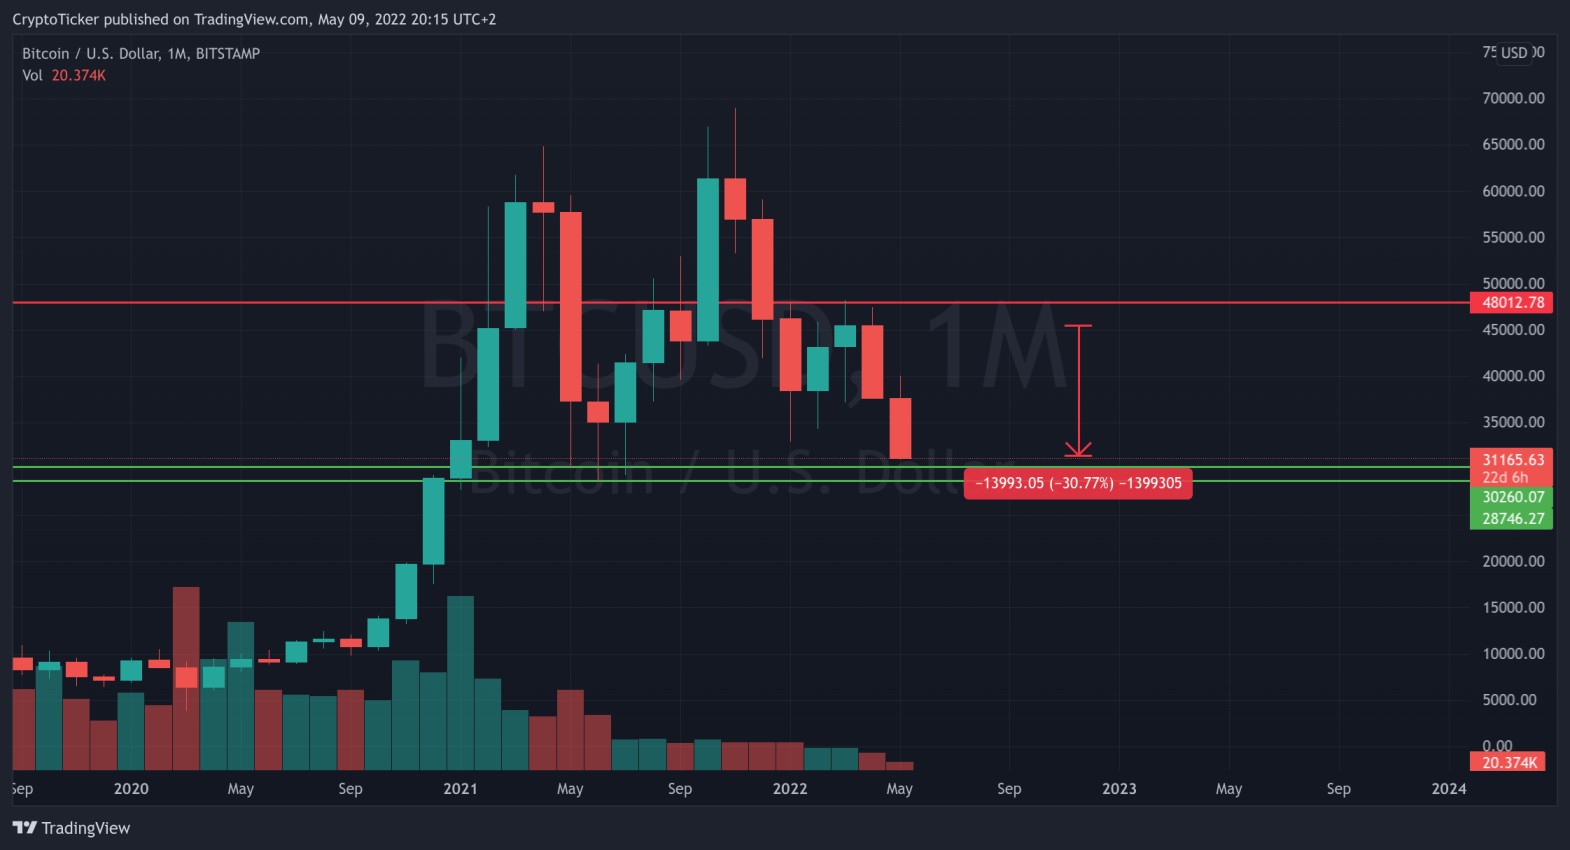 BTC/USD 1-month chart showing the crash in Bitcoin prices